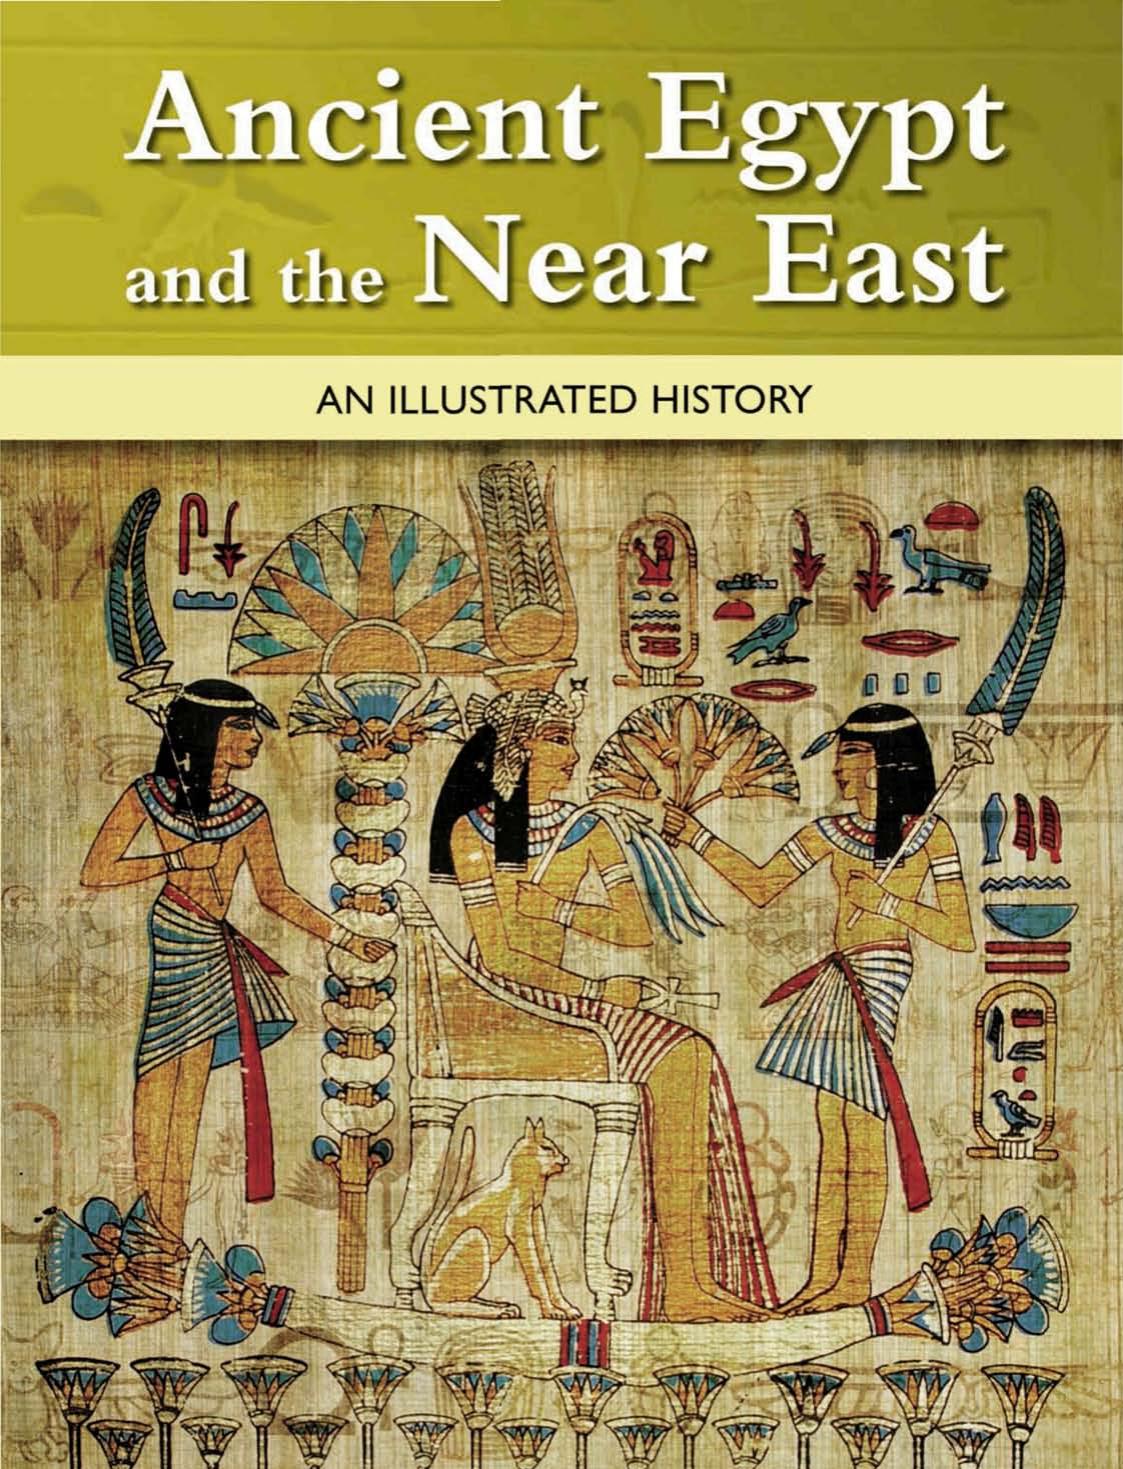 Illustrated History of Ancient Egypt and the Near East 2011